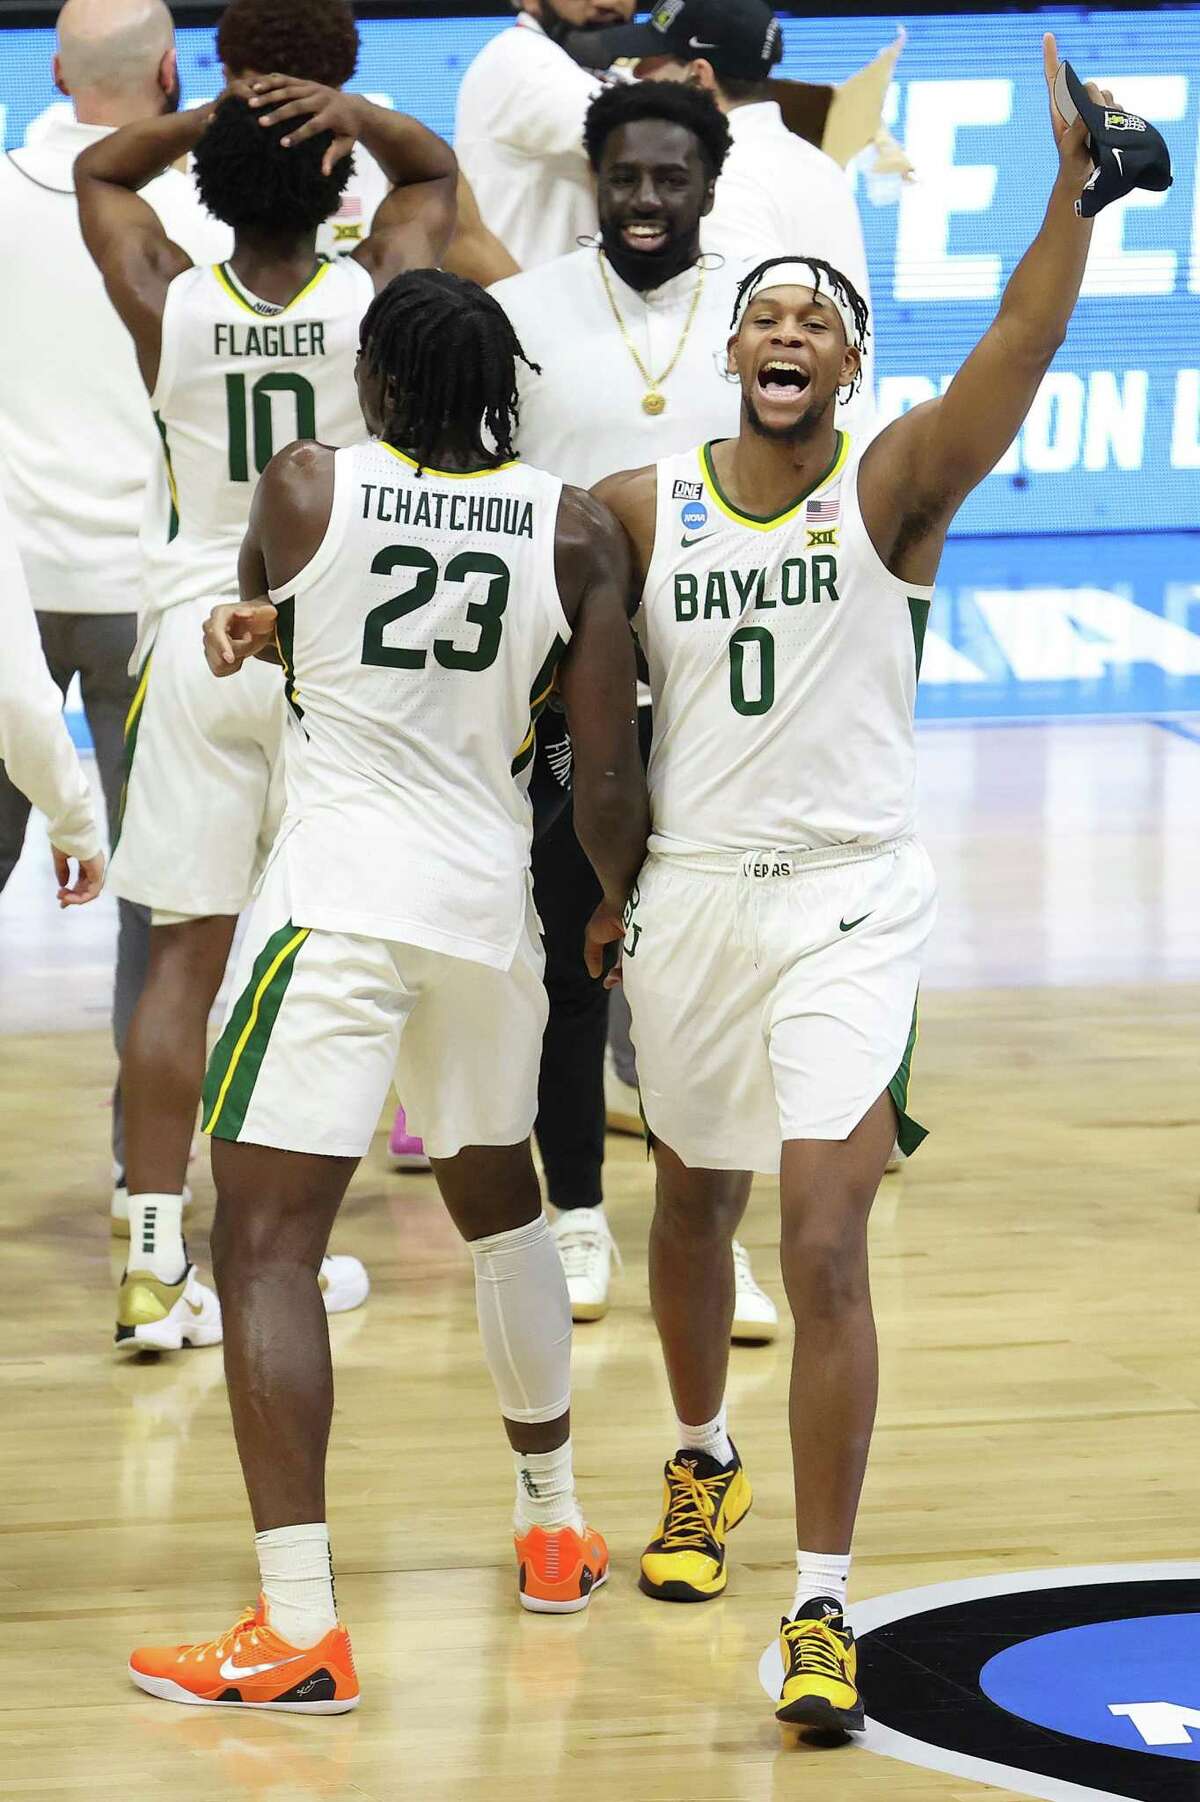 INDIANAPOLIS, INDIANA - MARCH 29: Flo Thamba #0 of the Baylor Bears and Jonathan Tchamwa Tchatchoua #23 celebrate after defeating the Arkansas Razorbacks in the Elite Eight round of the 2021 NCAA Men's Basketball Tournament at Lucas Oil Stadium on March 29, 2021 in Indianapolis, Indiana. (Photo by Andy Lyons/Getty Images)